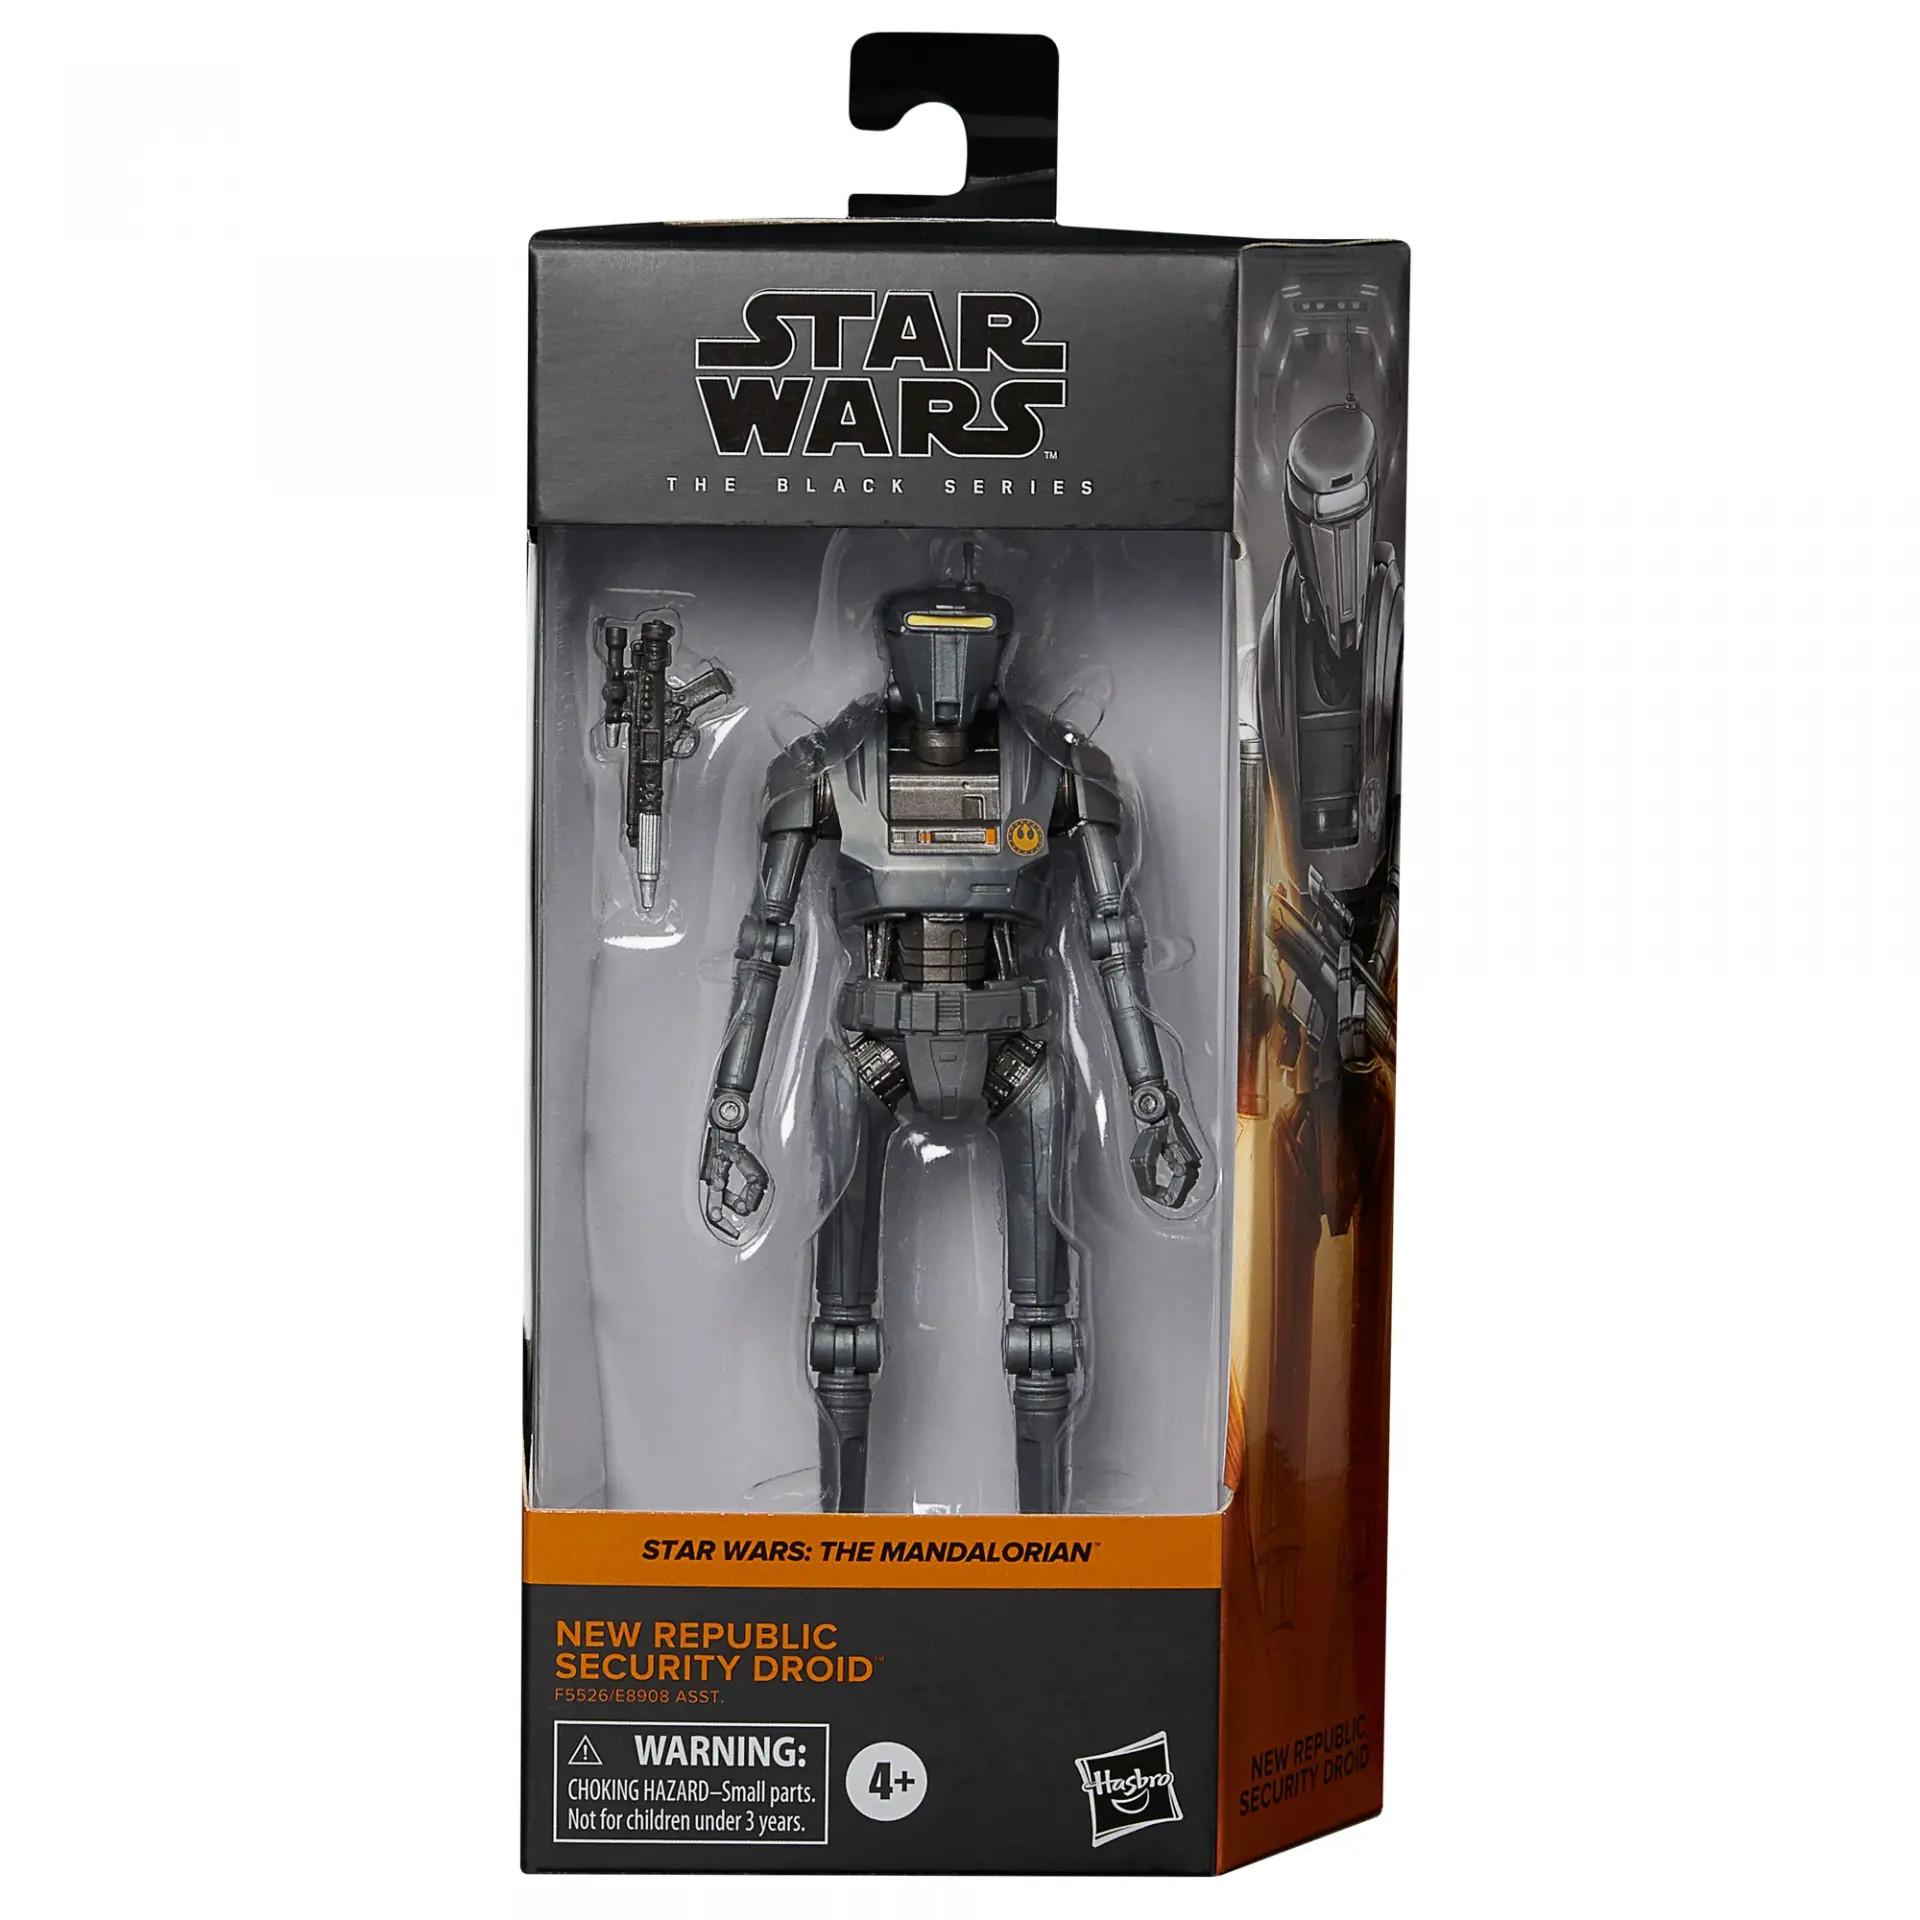 Star wars the black series new republic security droid jawascave 10